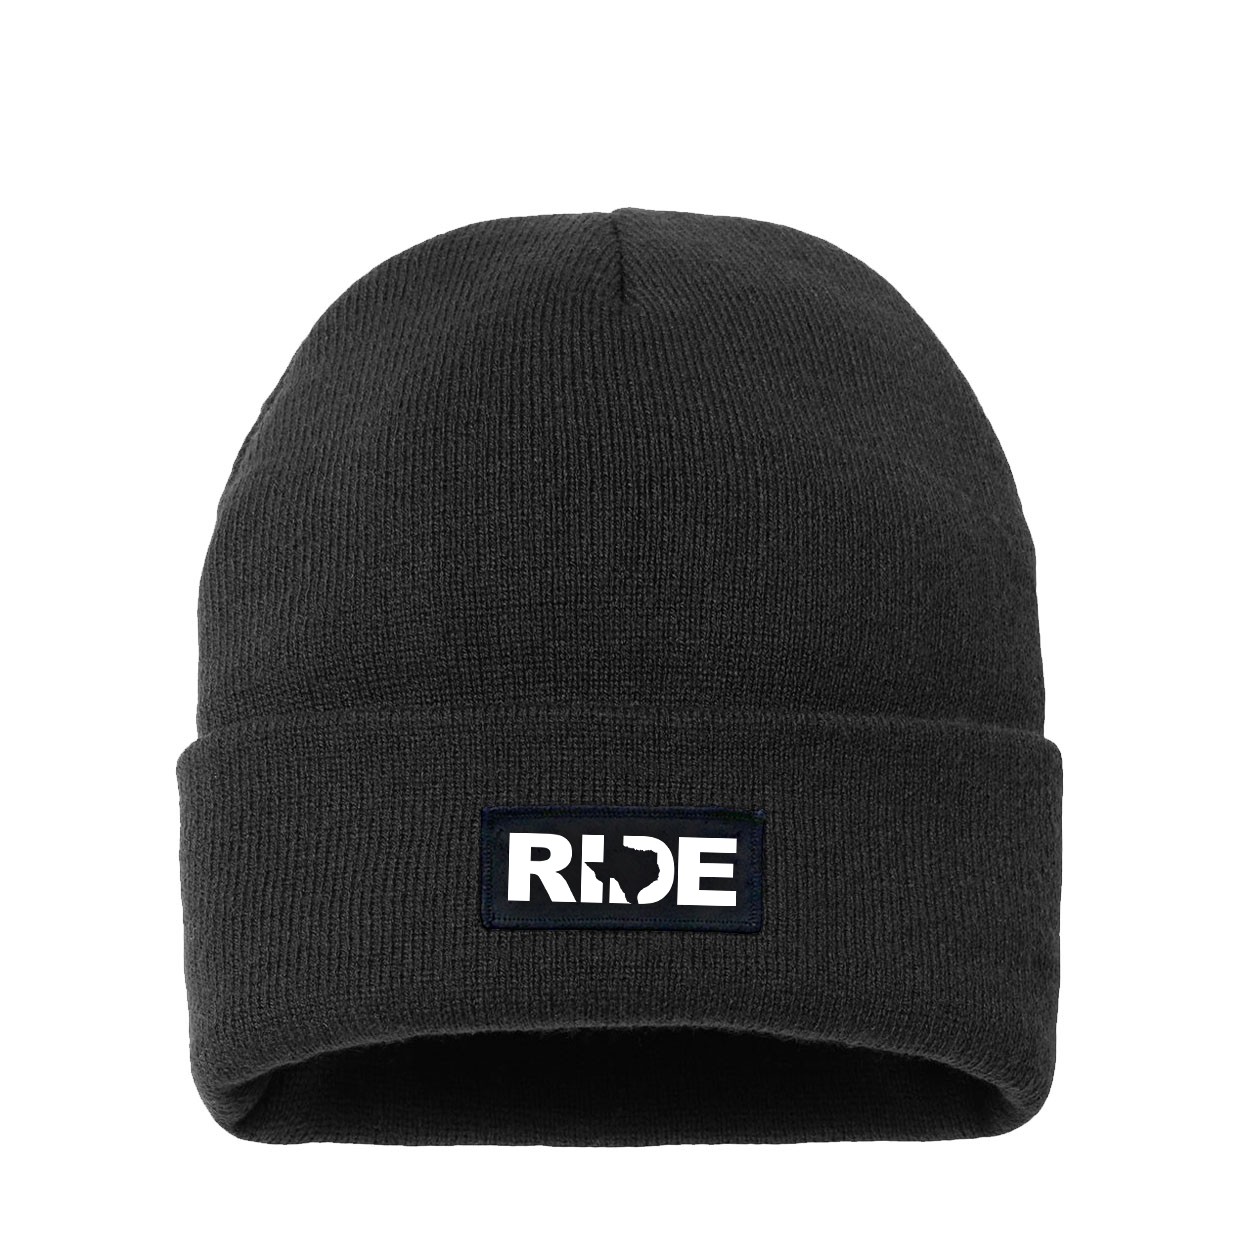 Ride Texas Night Out Woven Patch Night Out Sherpa Lined Cuffed Beanie Black (White Logo)